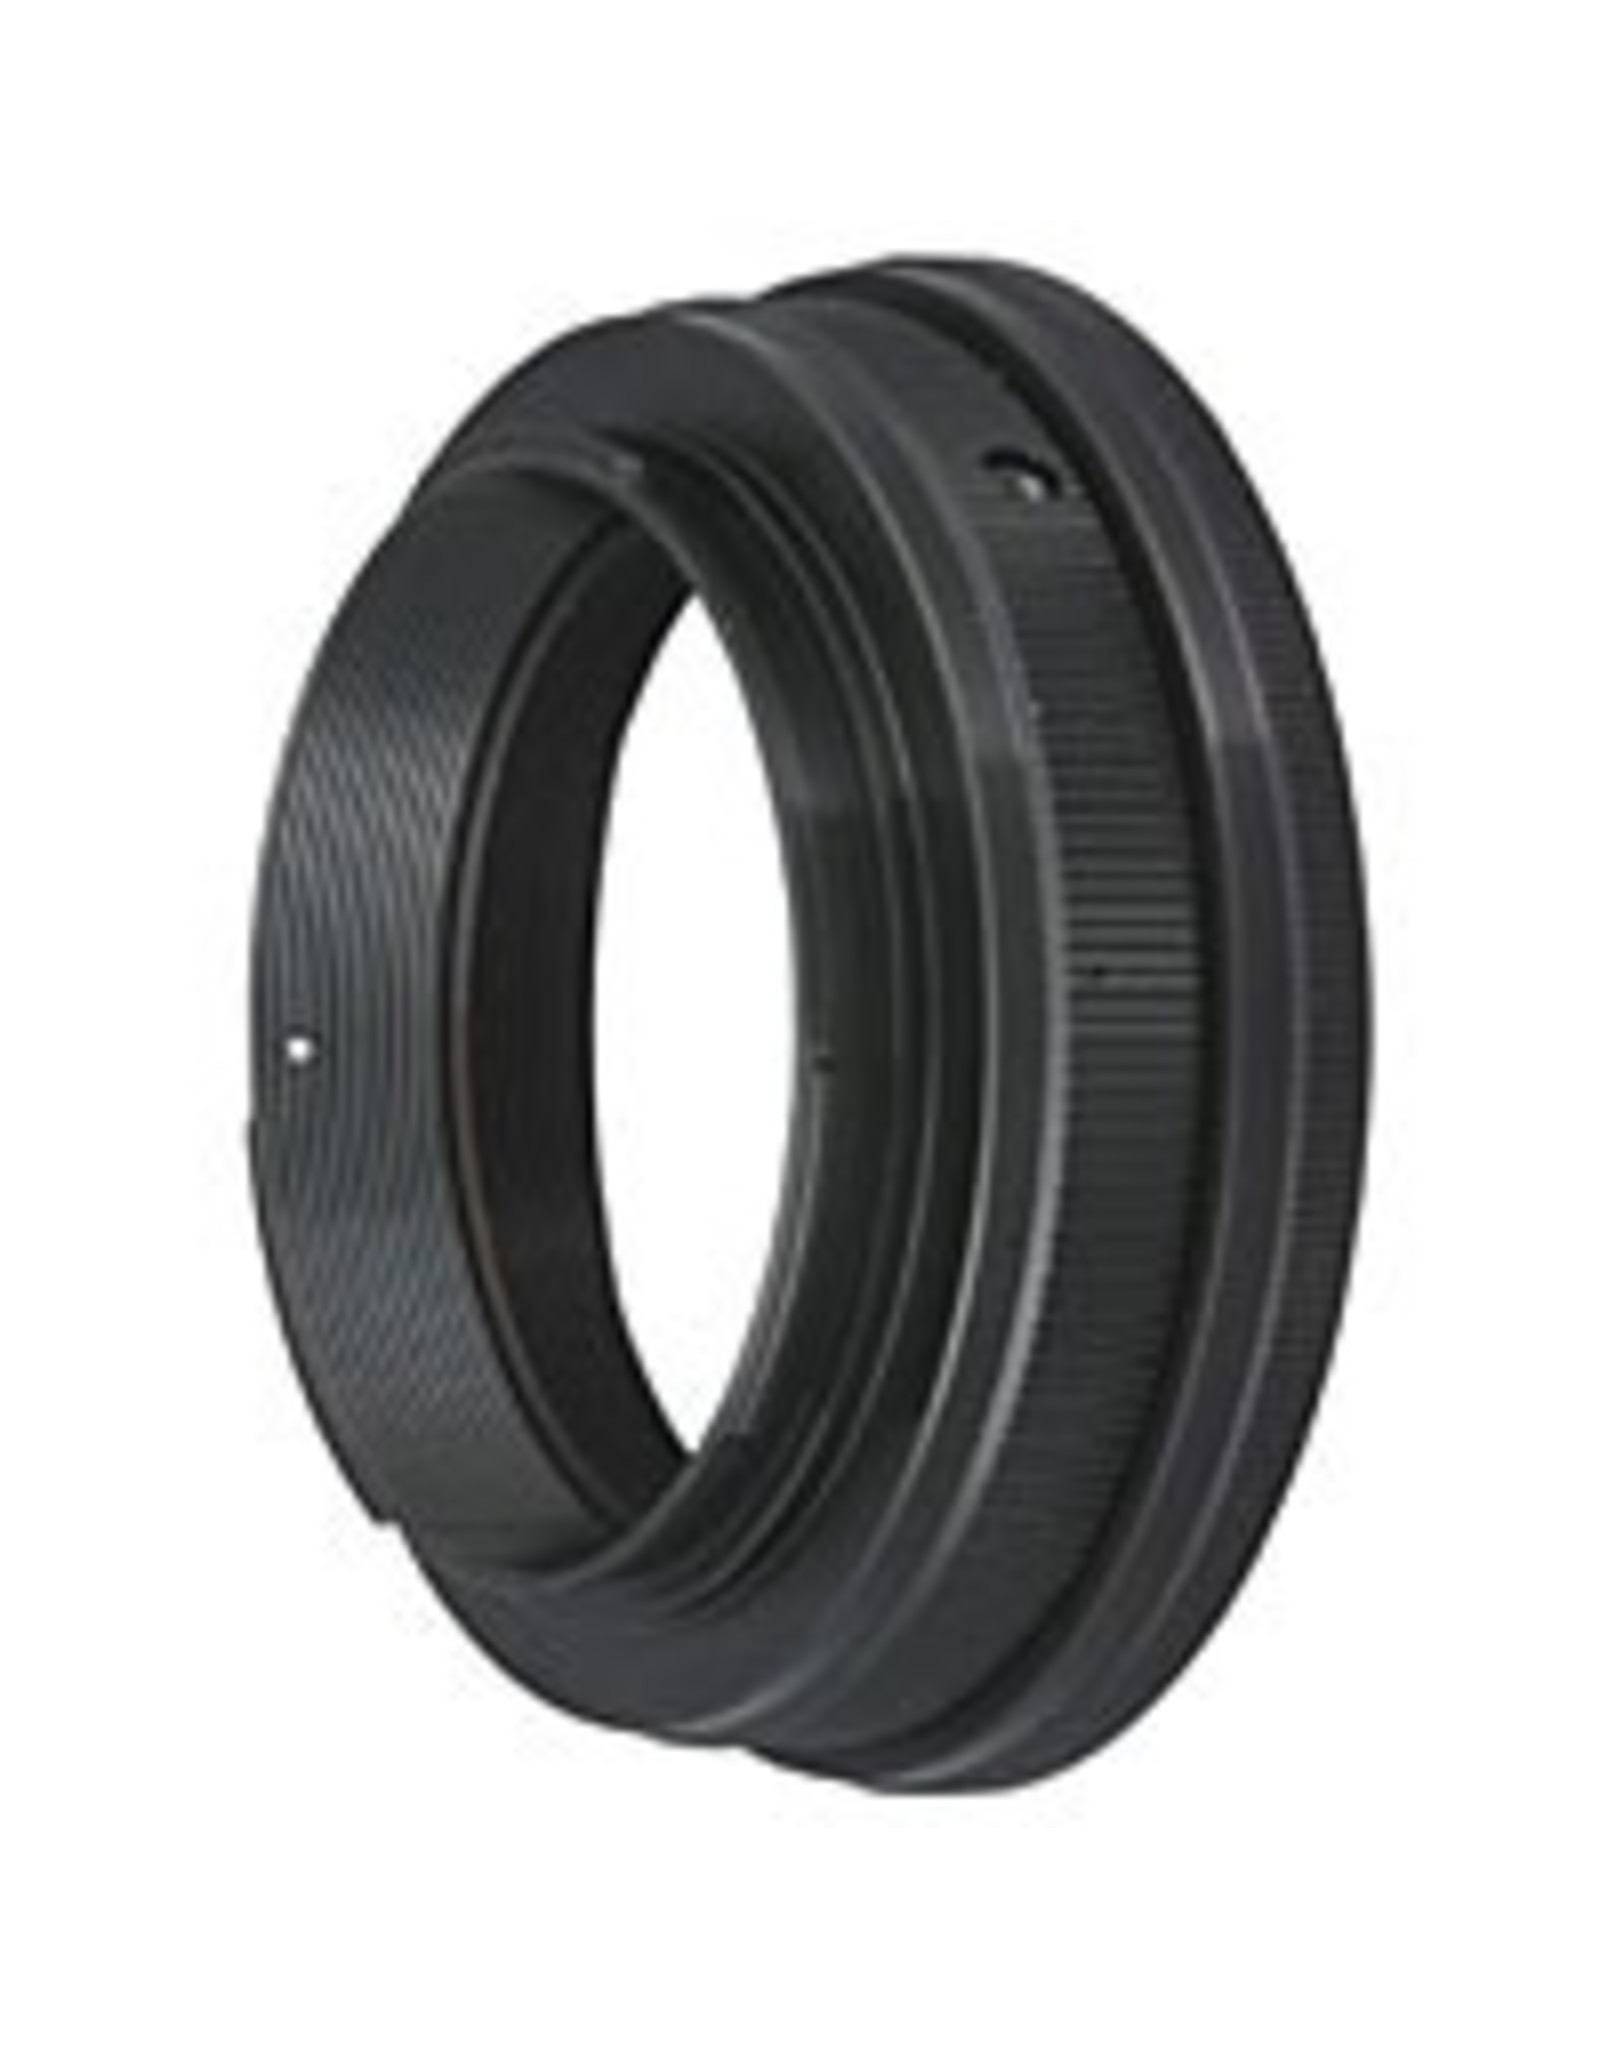 Tele vue Wide T-Adapter - Canon EOS